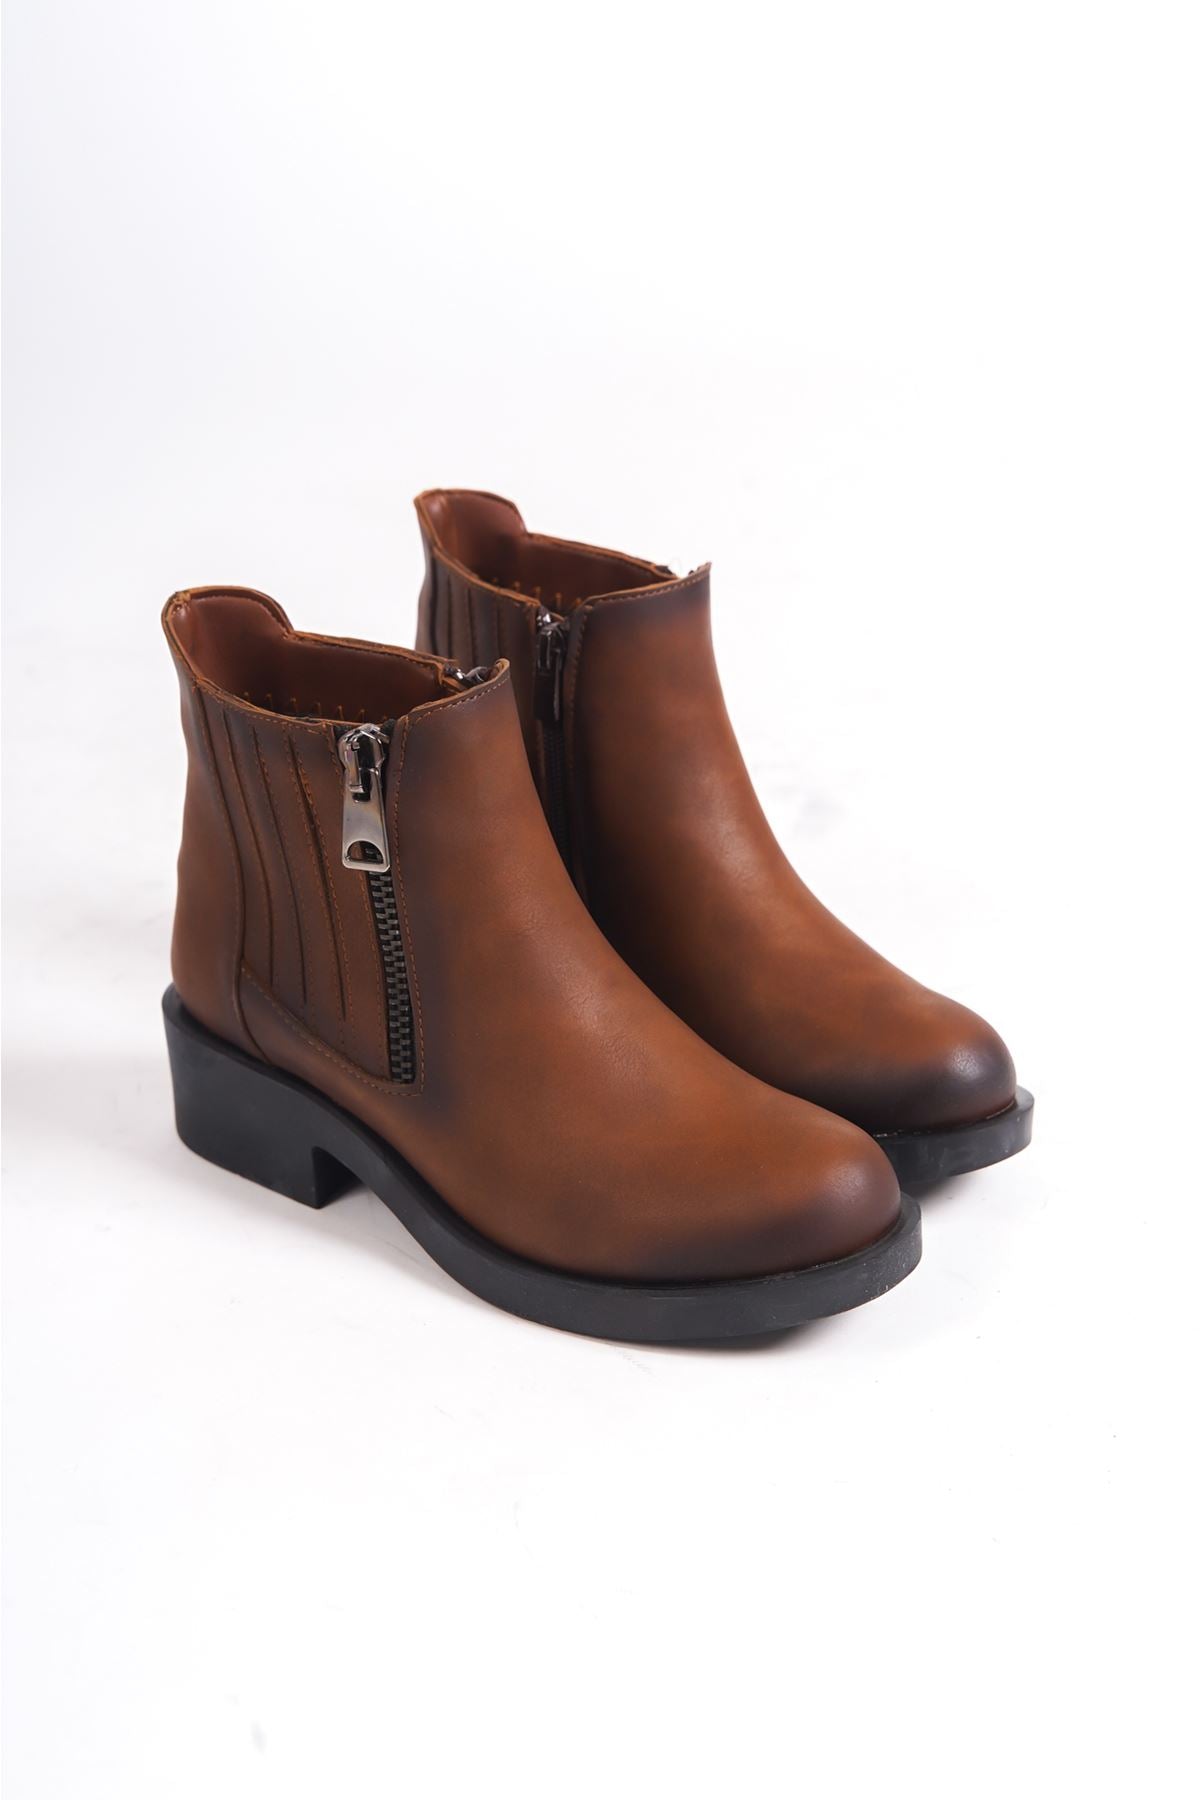 Ayam Women's Tan Zipper Detailed Ankle Boots - STREETMODE ™